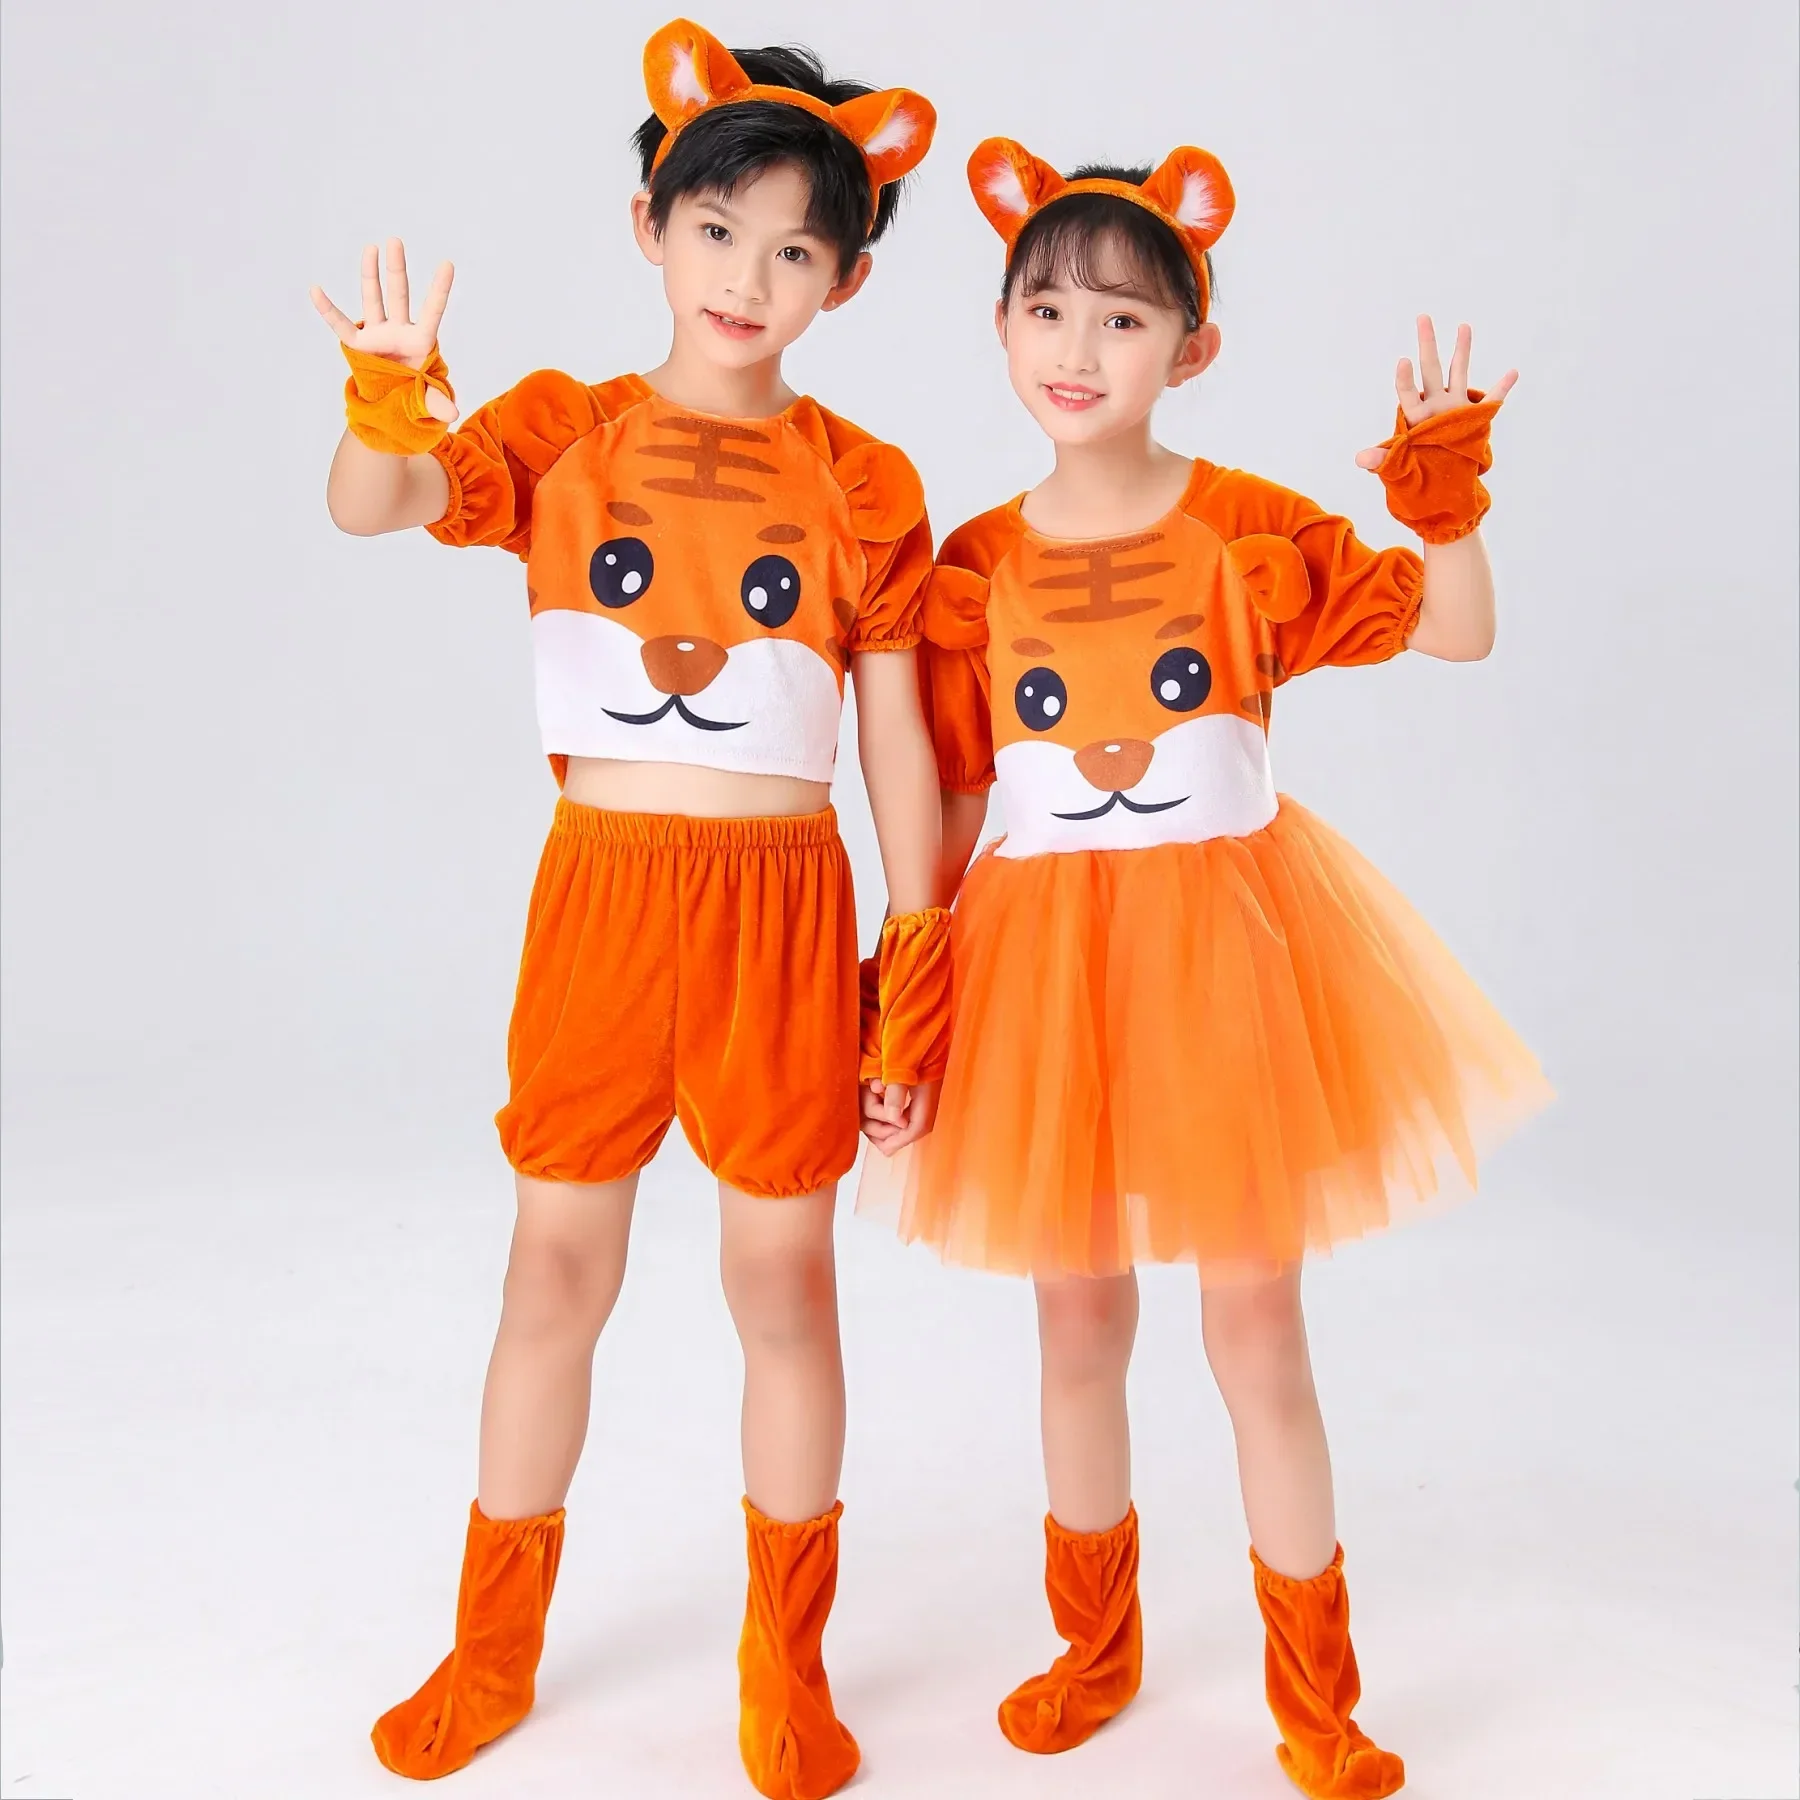 

Cosplay Costume Kids Girl Tiger Fancy Dress Tiger Child Costume Halloween Costume Purim Carnival Outfit Kids Stage Performance